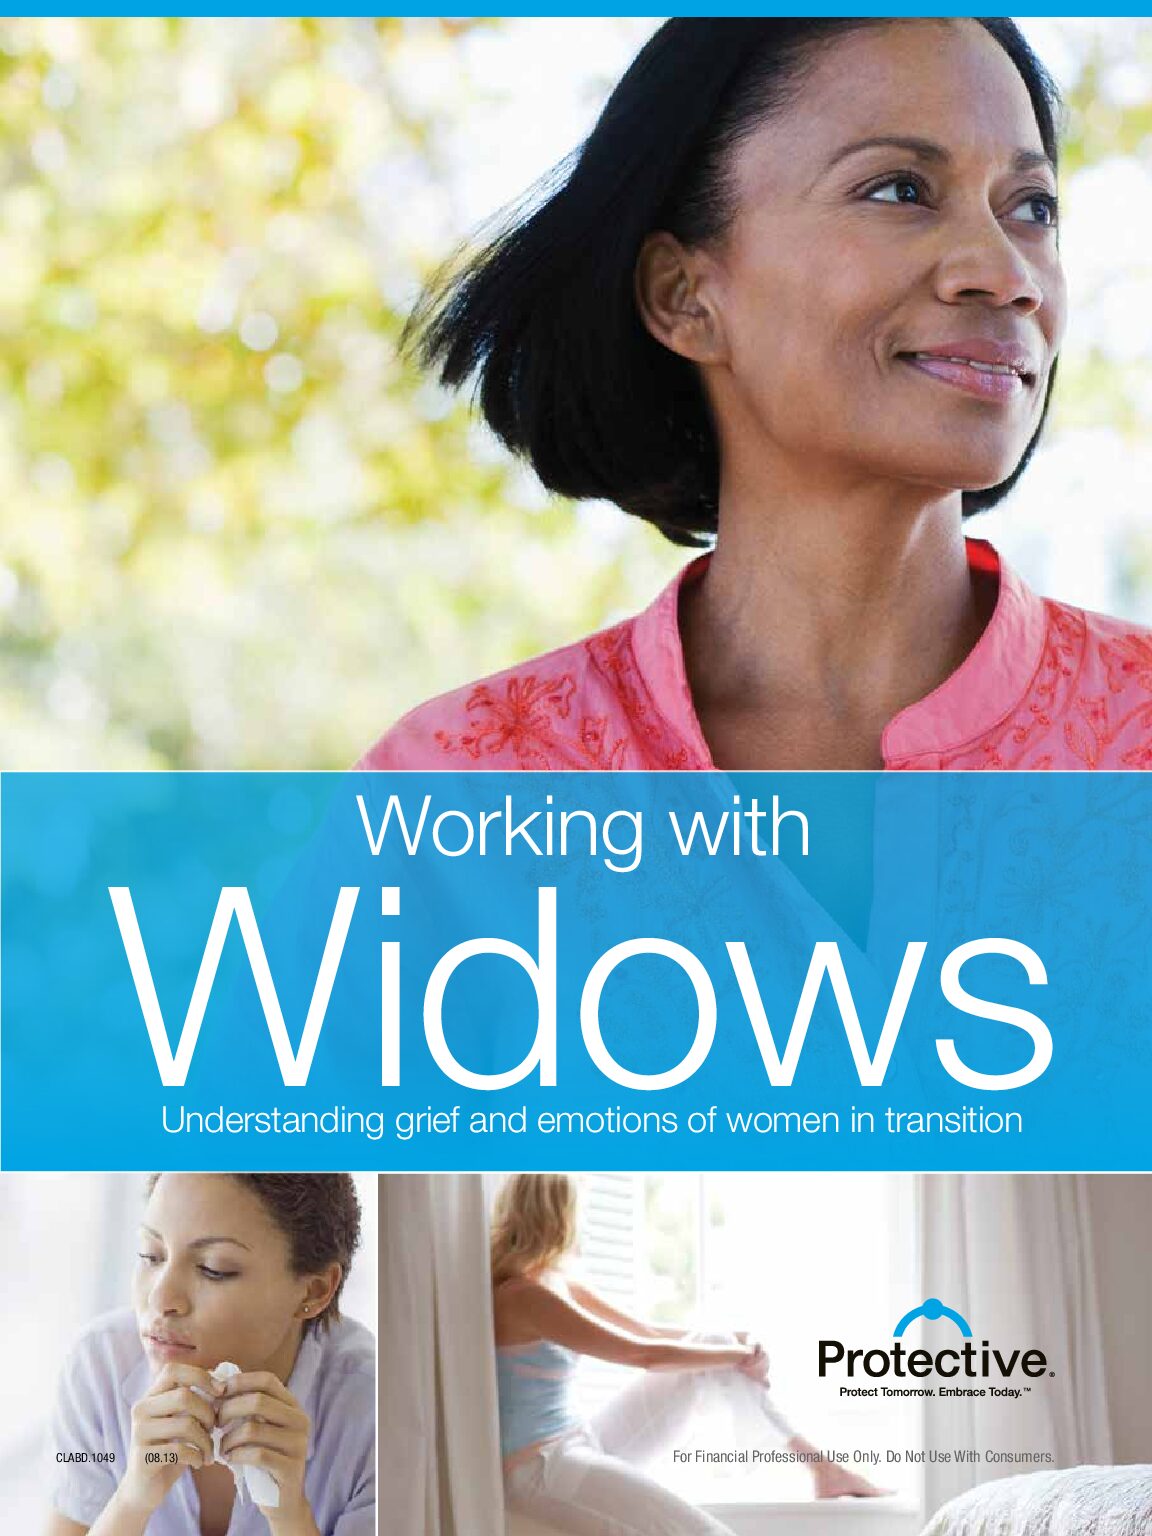 Working with Widows